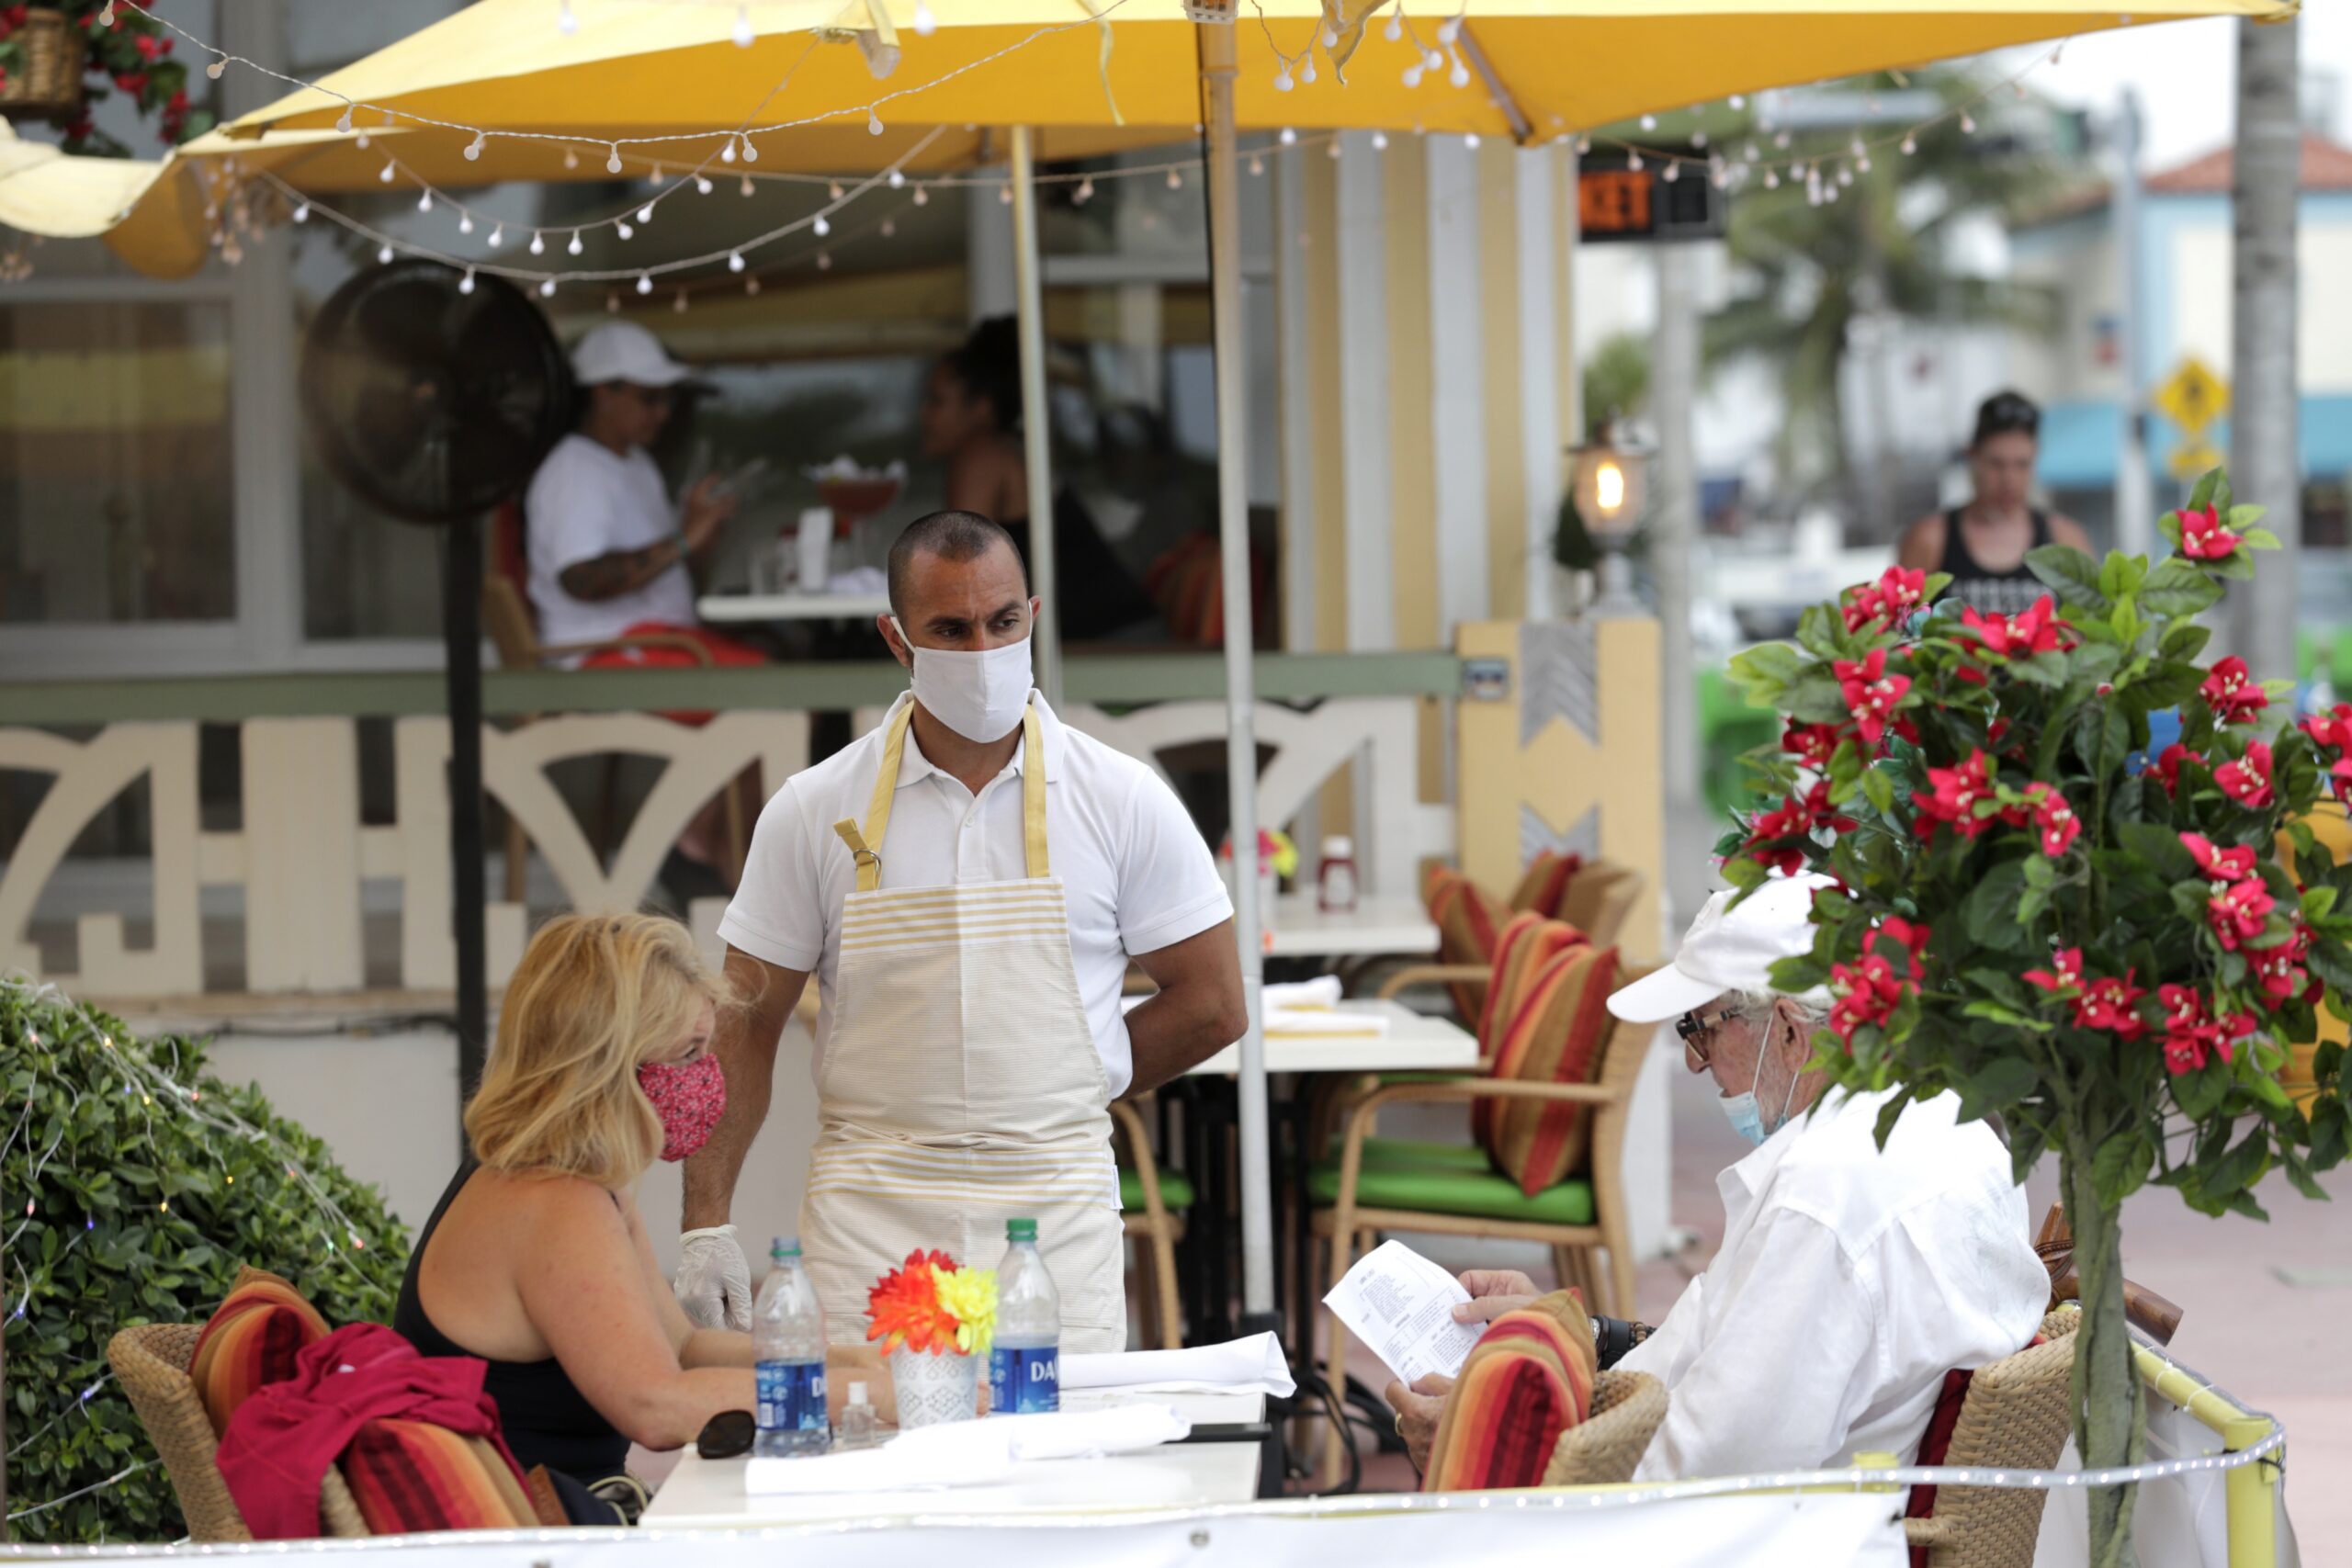 People sit outside at a restaurant during the coronavirus pandemic